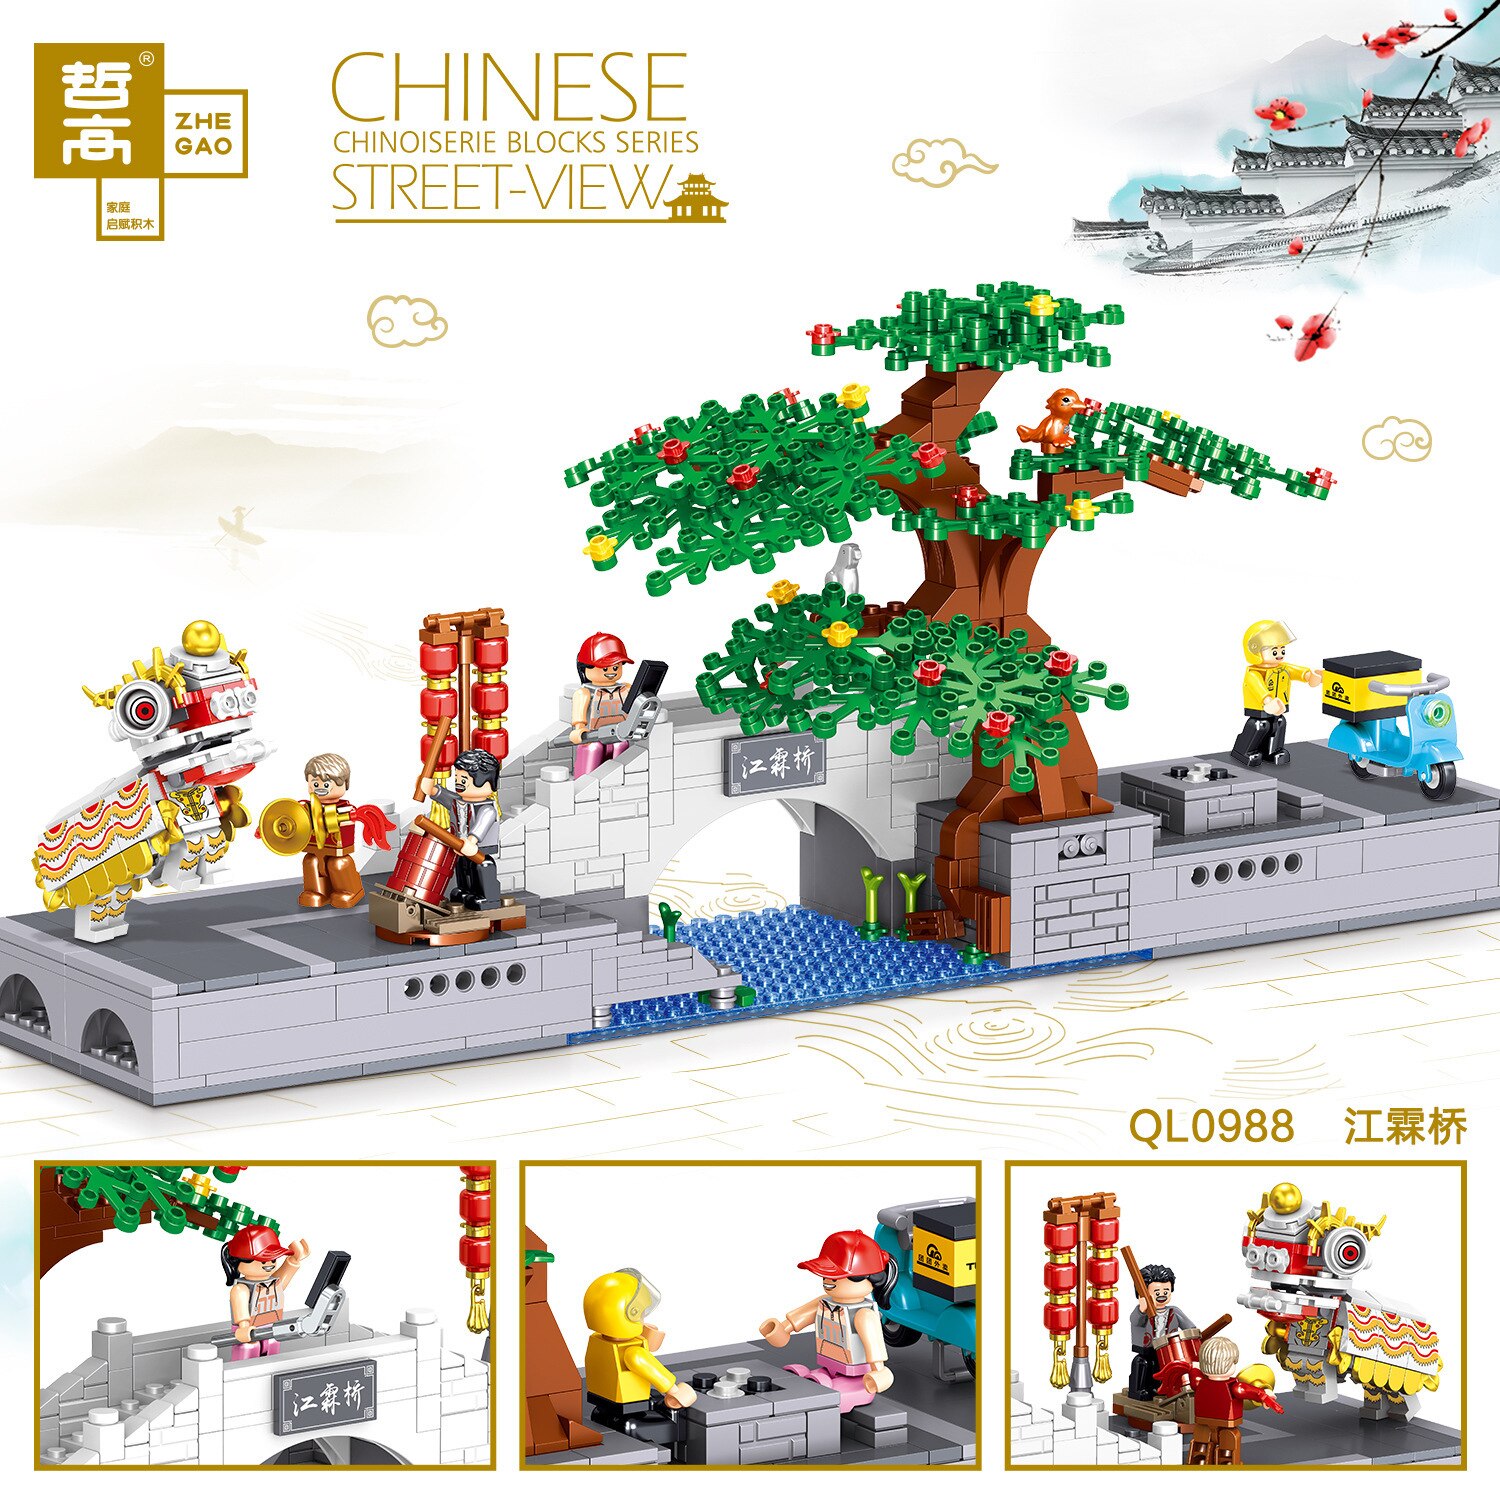 Street View Educational Building Blocks Toys For Kids Girls DIY Birthday Present QL0988-0993 Chinese Garden Architecture Models alx